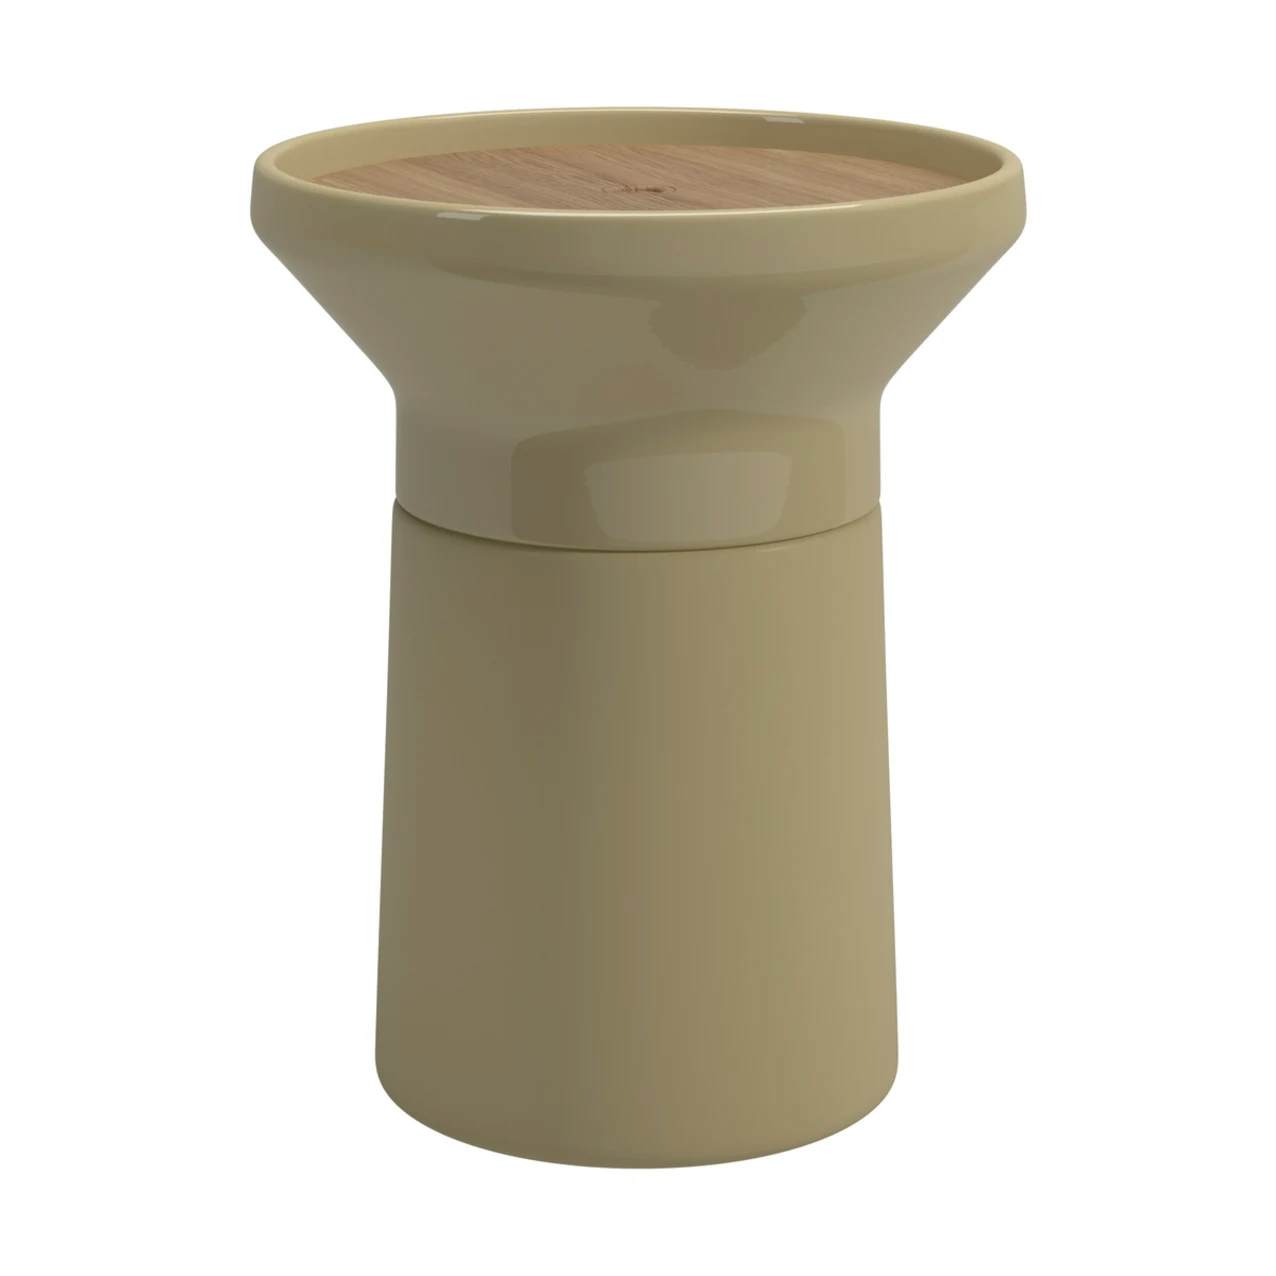 Gloster Coso Side Table | Frame: Ceramic, Sand Matte & Gloss | Top: Natural Teak